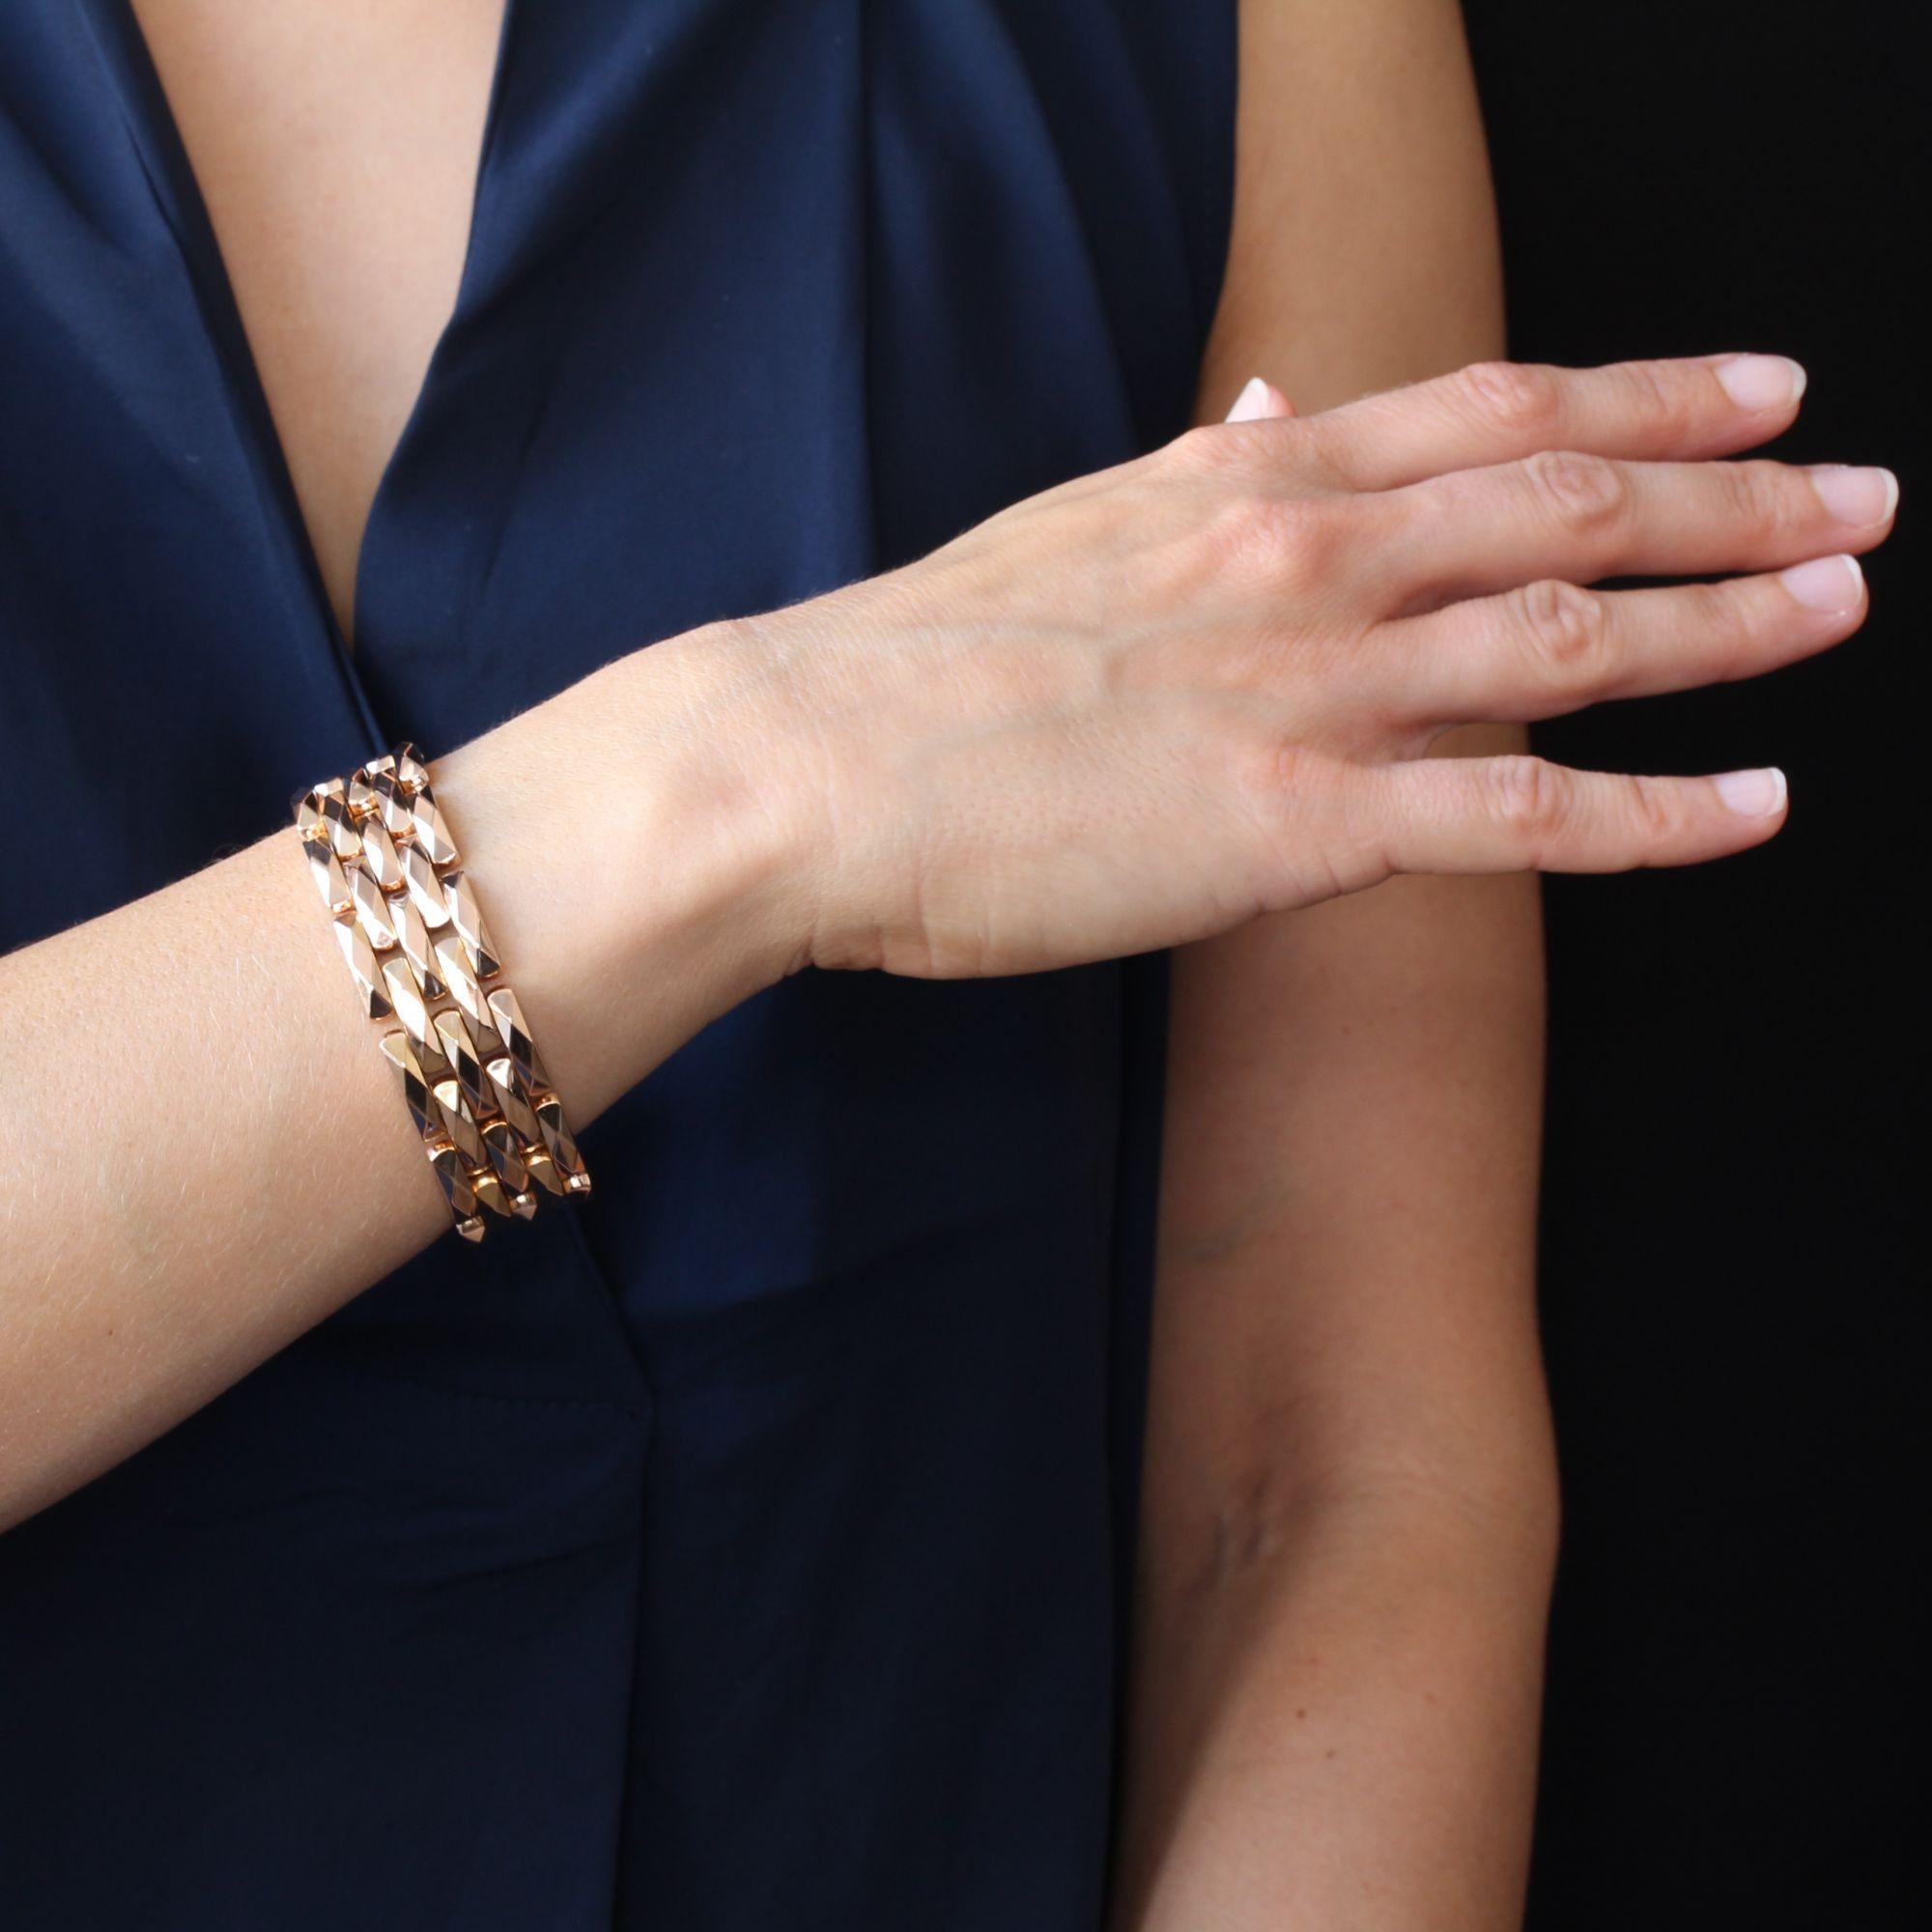 Bracelet in 18 karat rose gold, eagle head and rhinoceros head hallmarks.
Flexible, openwork, this splendid retro bracelet is formed of 5 rows of faceted bricks. The clasp is ratchet with safety 